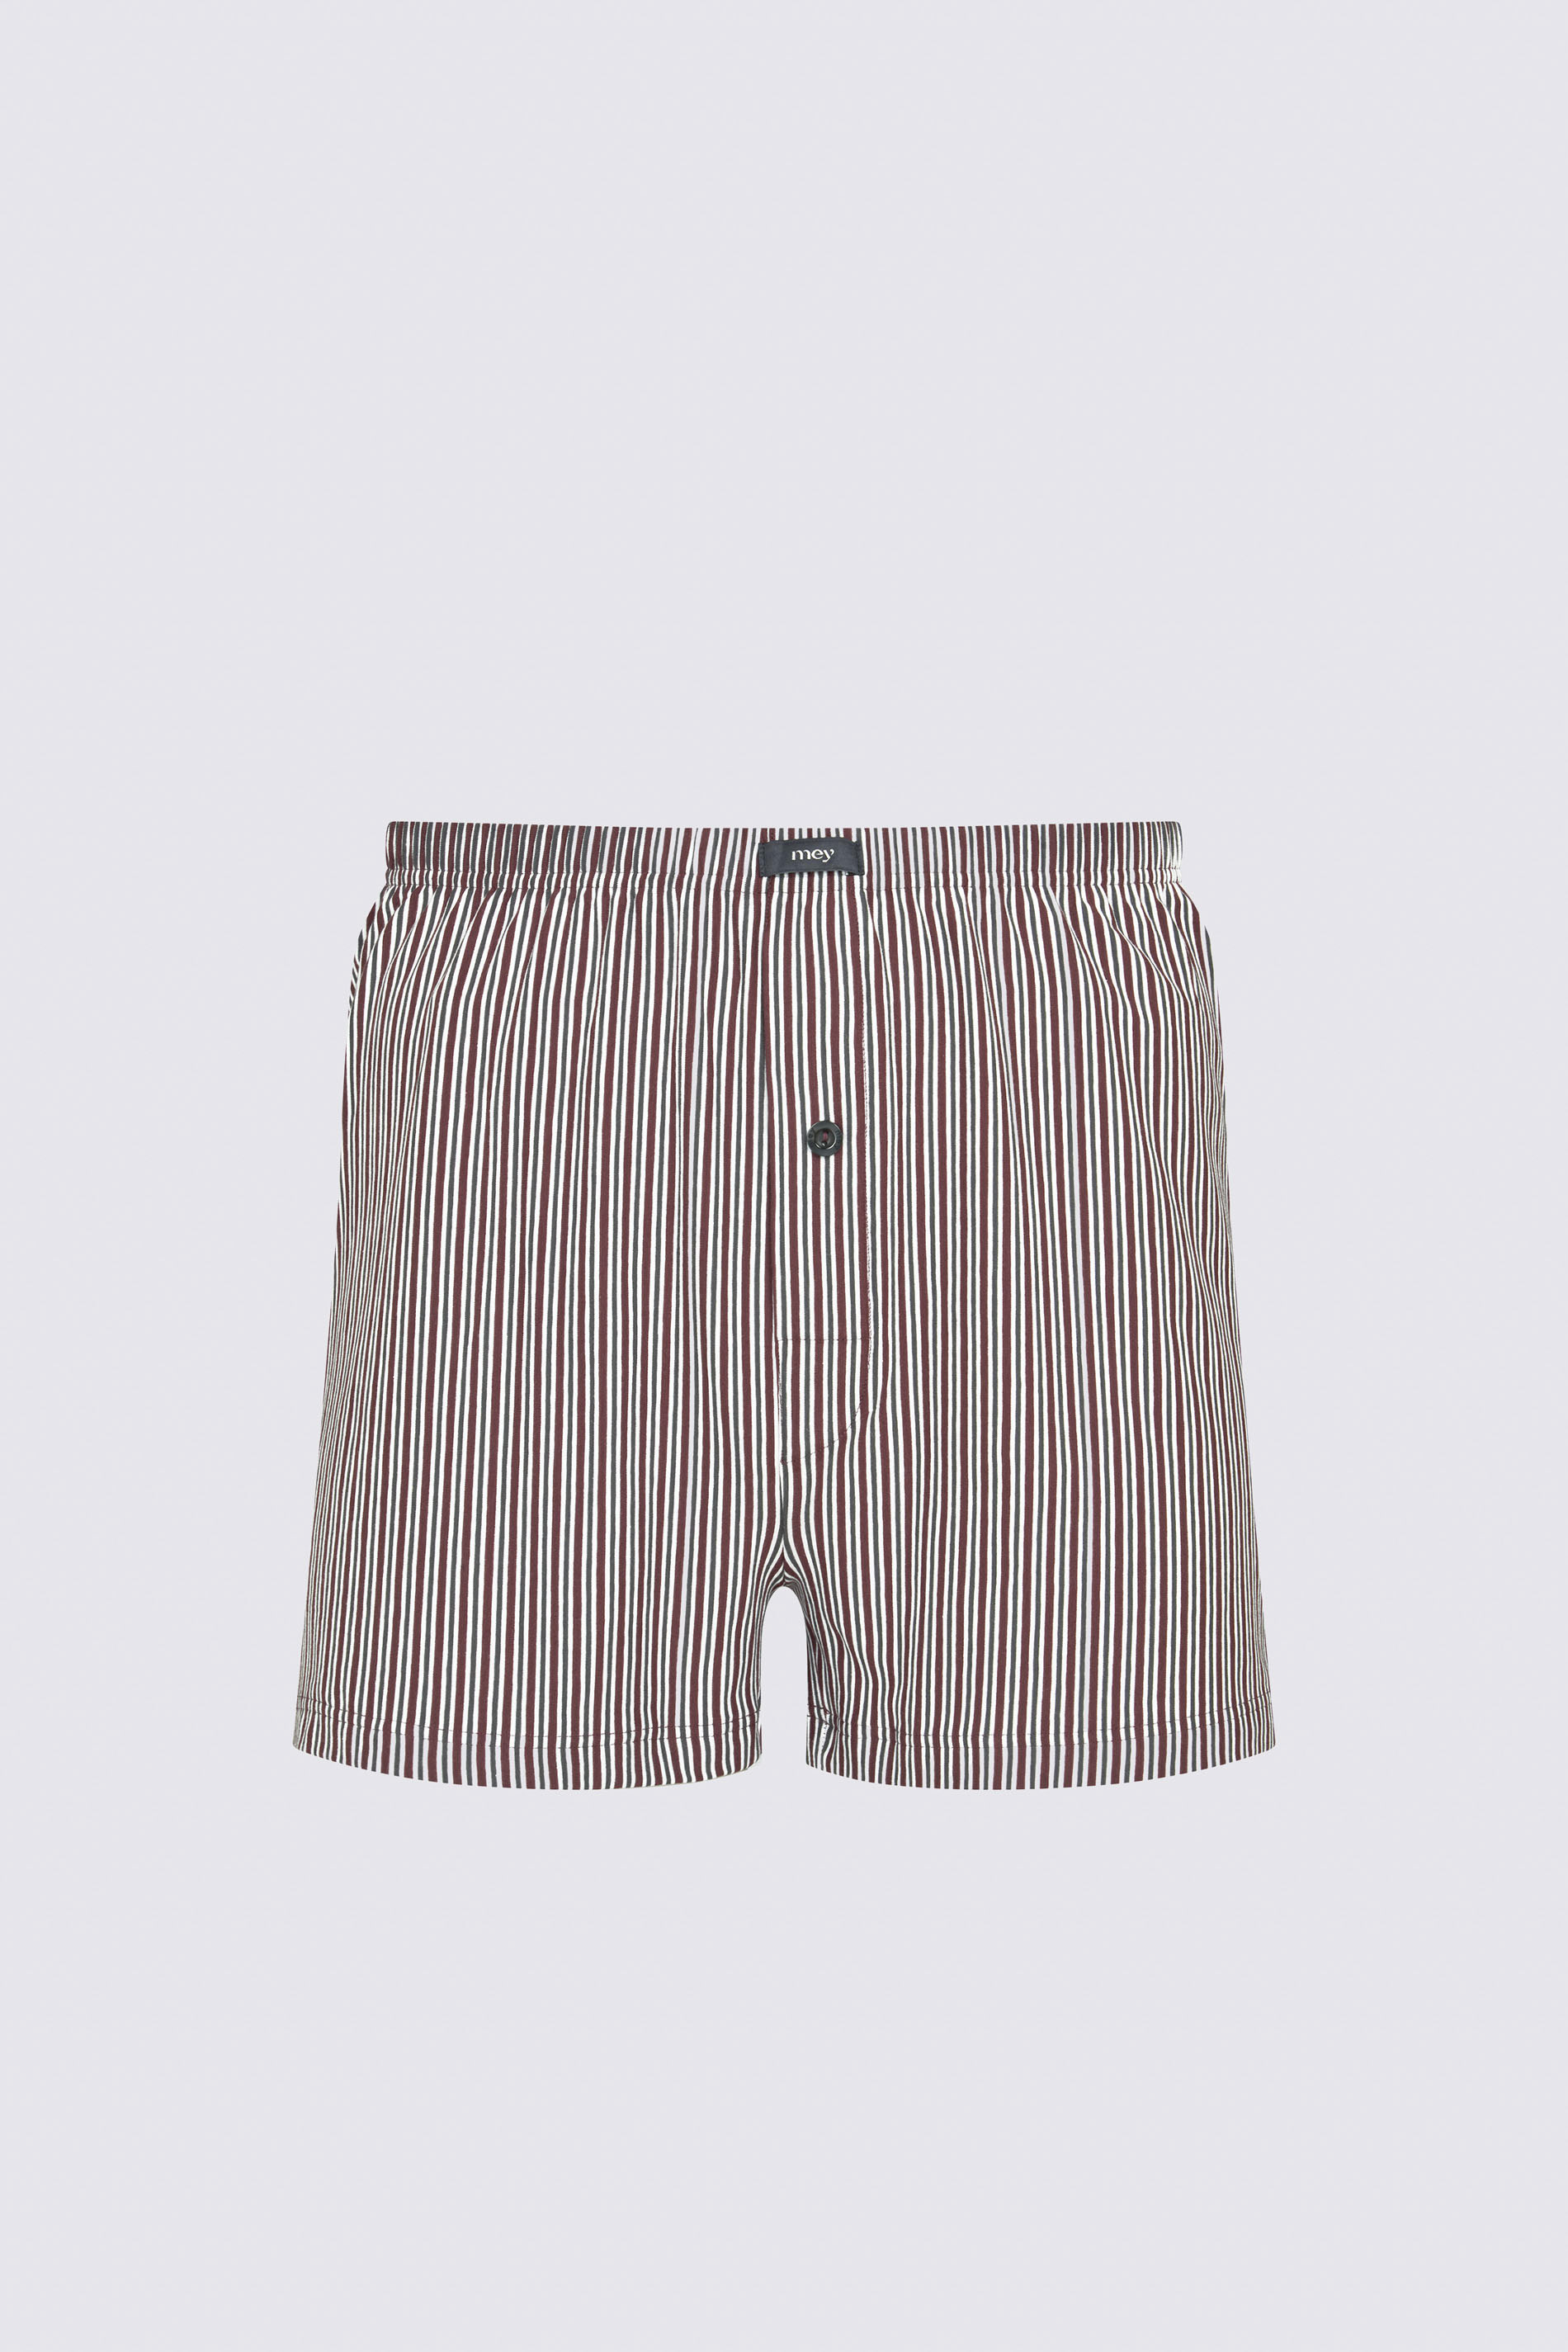 Boxershorts Oxblood Serie 3 Col Stripes Uitknippen | mey®